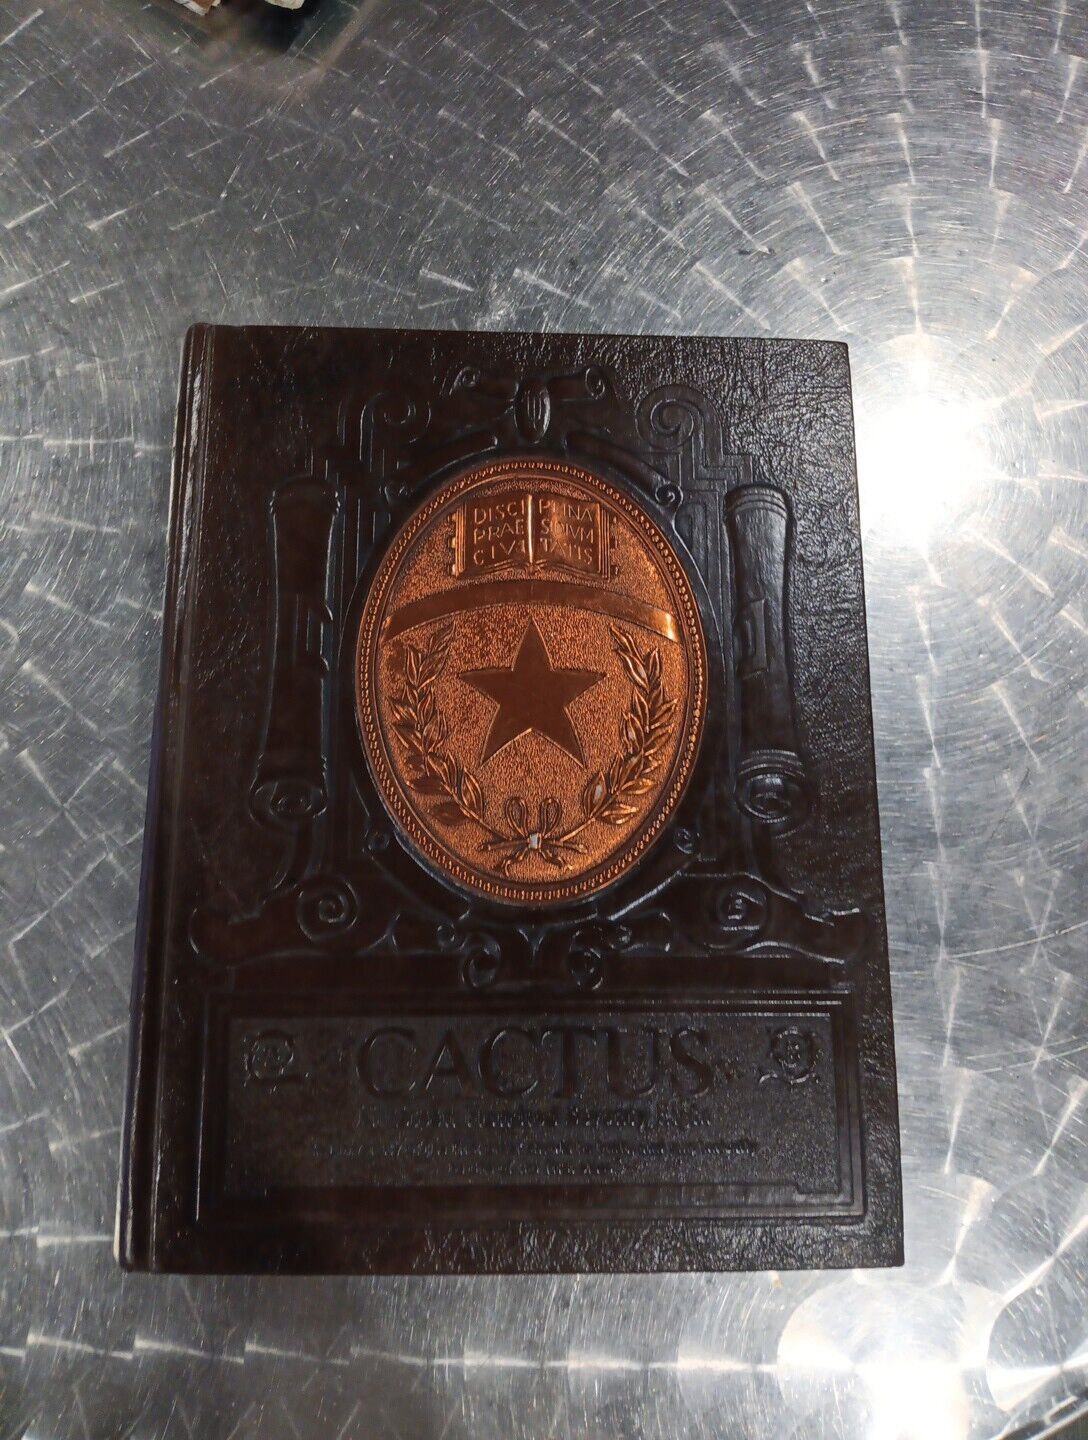 The University of Texas,  1978 Cactus yearbook, clean with no writings/marks NEW